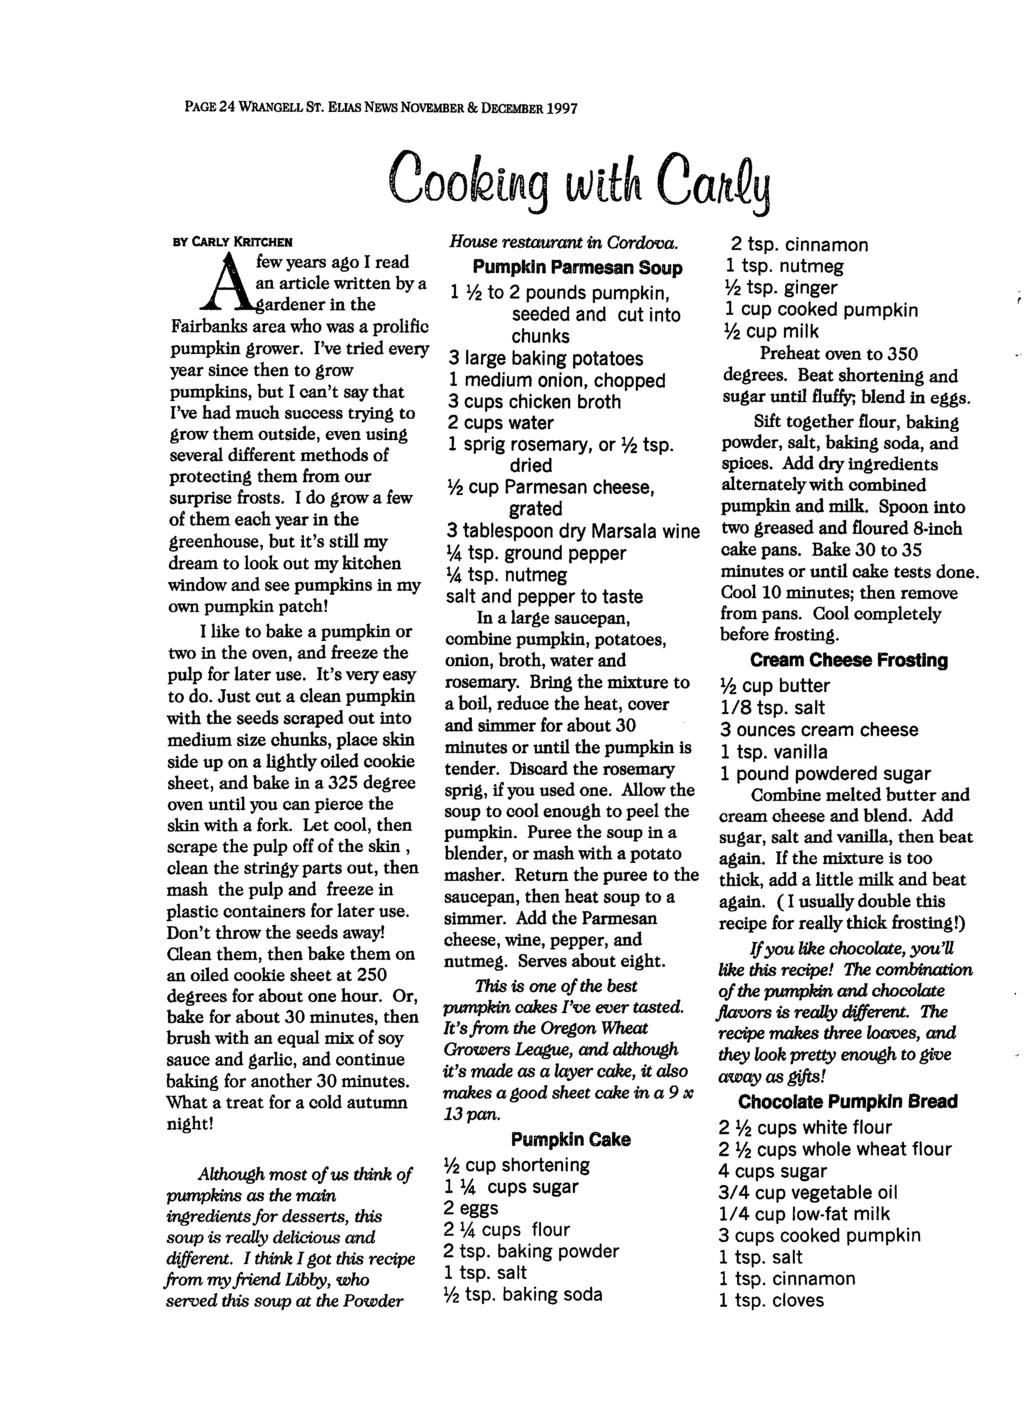 PAGE 24 WRANGELL ST. ELIAS NEWS NOVEMBER & DECEMBER 1997 BY CARLY KRITCHEN ew years ago I read n article written by a ardener in the Fairbanks area who was a prolific pumpkin grower.